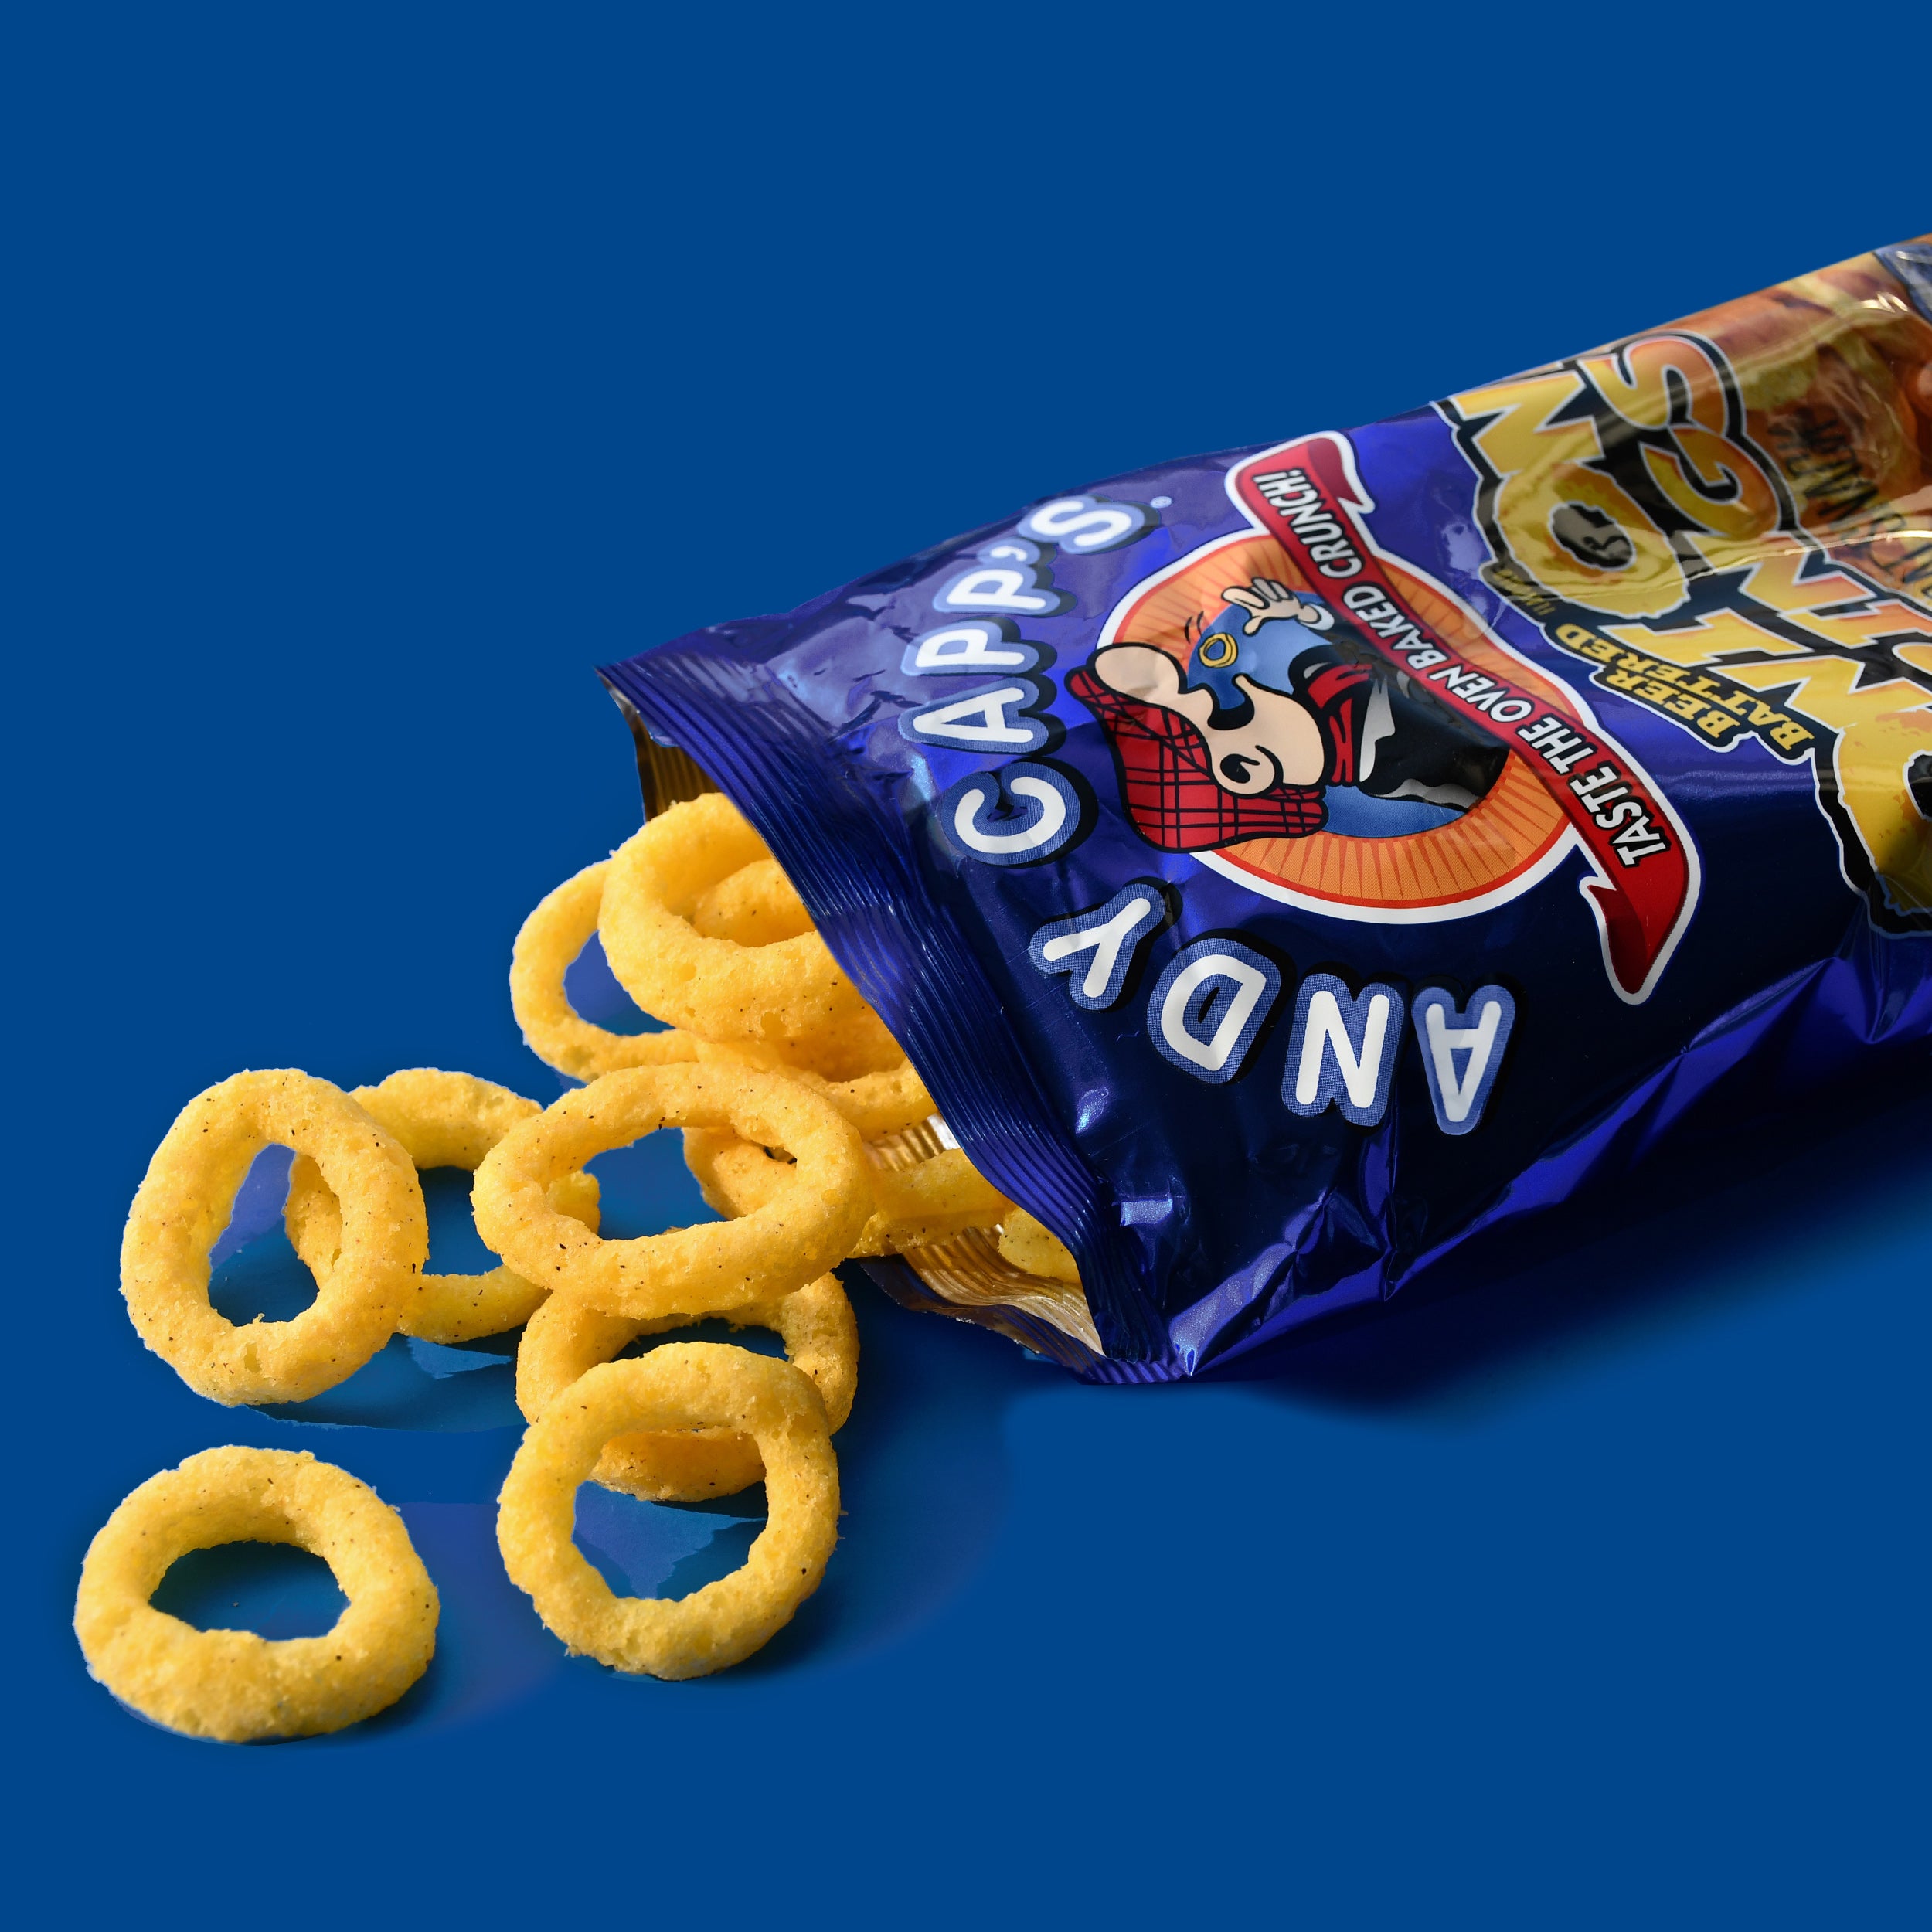 Funyuns Onion Flavored Rings | Shop | Ramsey's Cash Saver